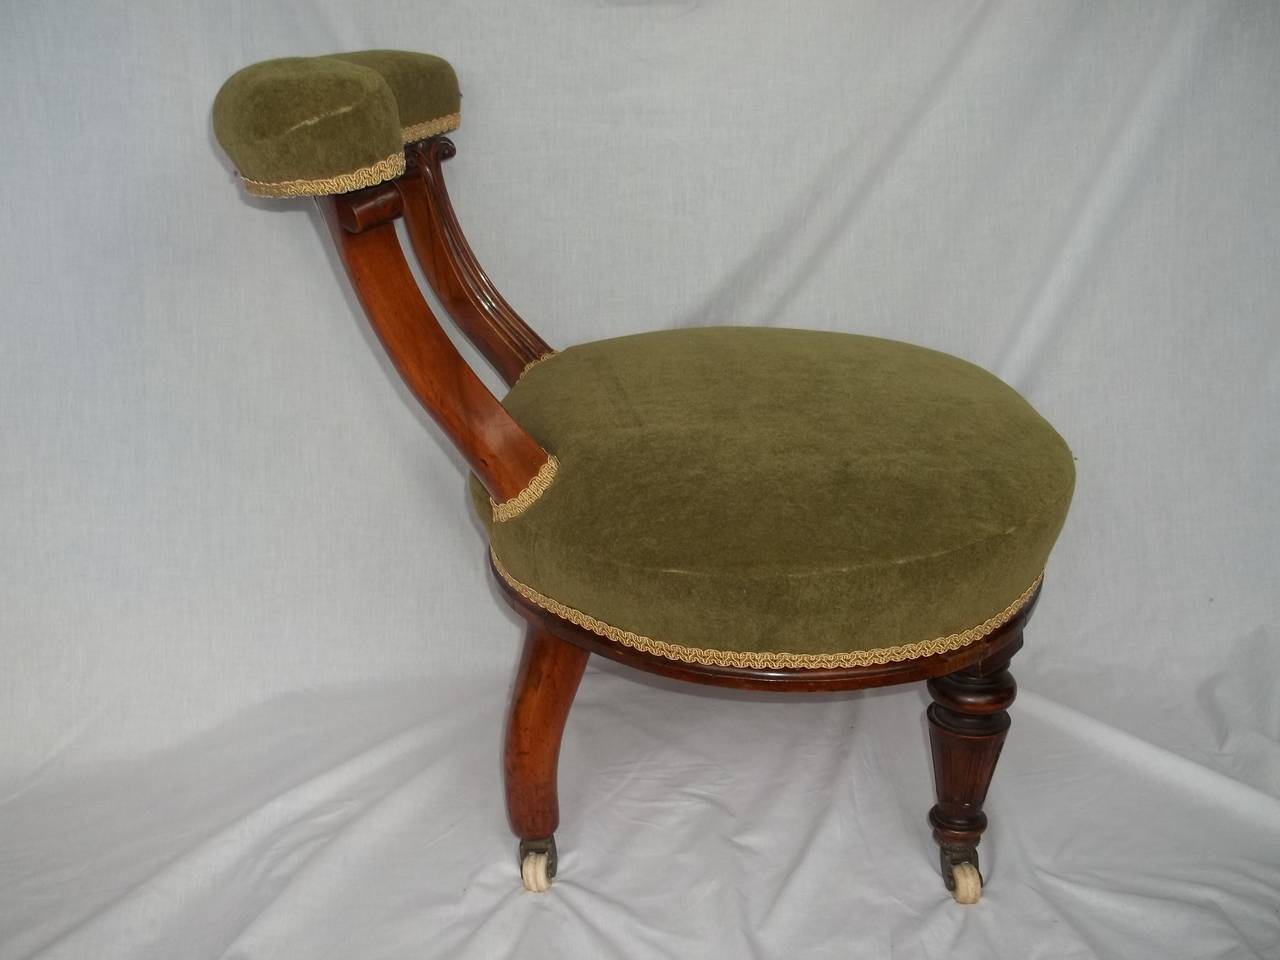 This is a very attractive English nursing or occasional chair from the William IVth period of the early 19th century, circa 1830.

The frame is made of walnut and the oval seat is upholstered in a green velvety fabric, edged with an antique gold